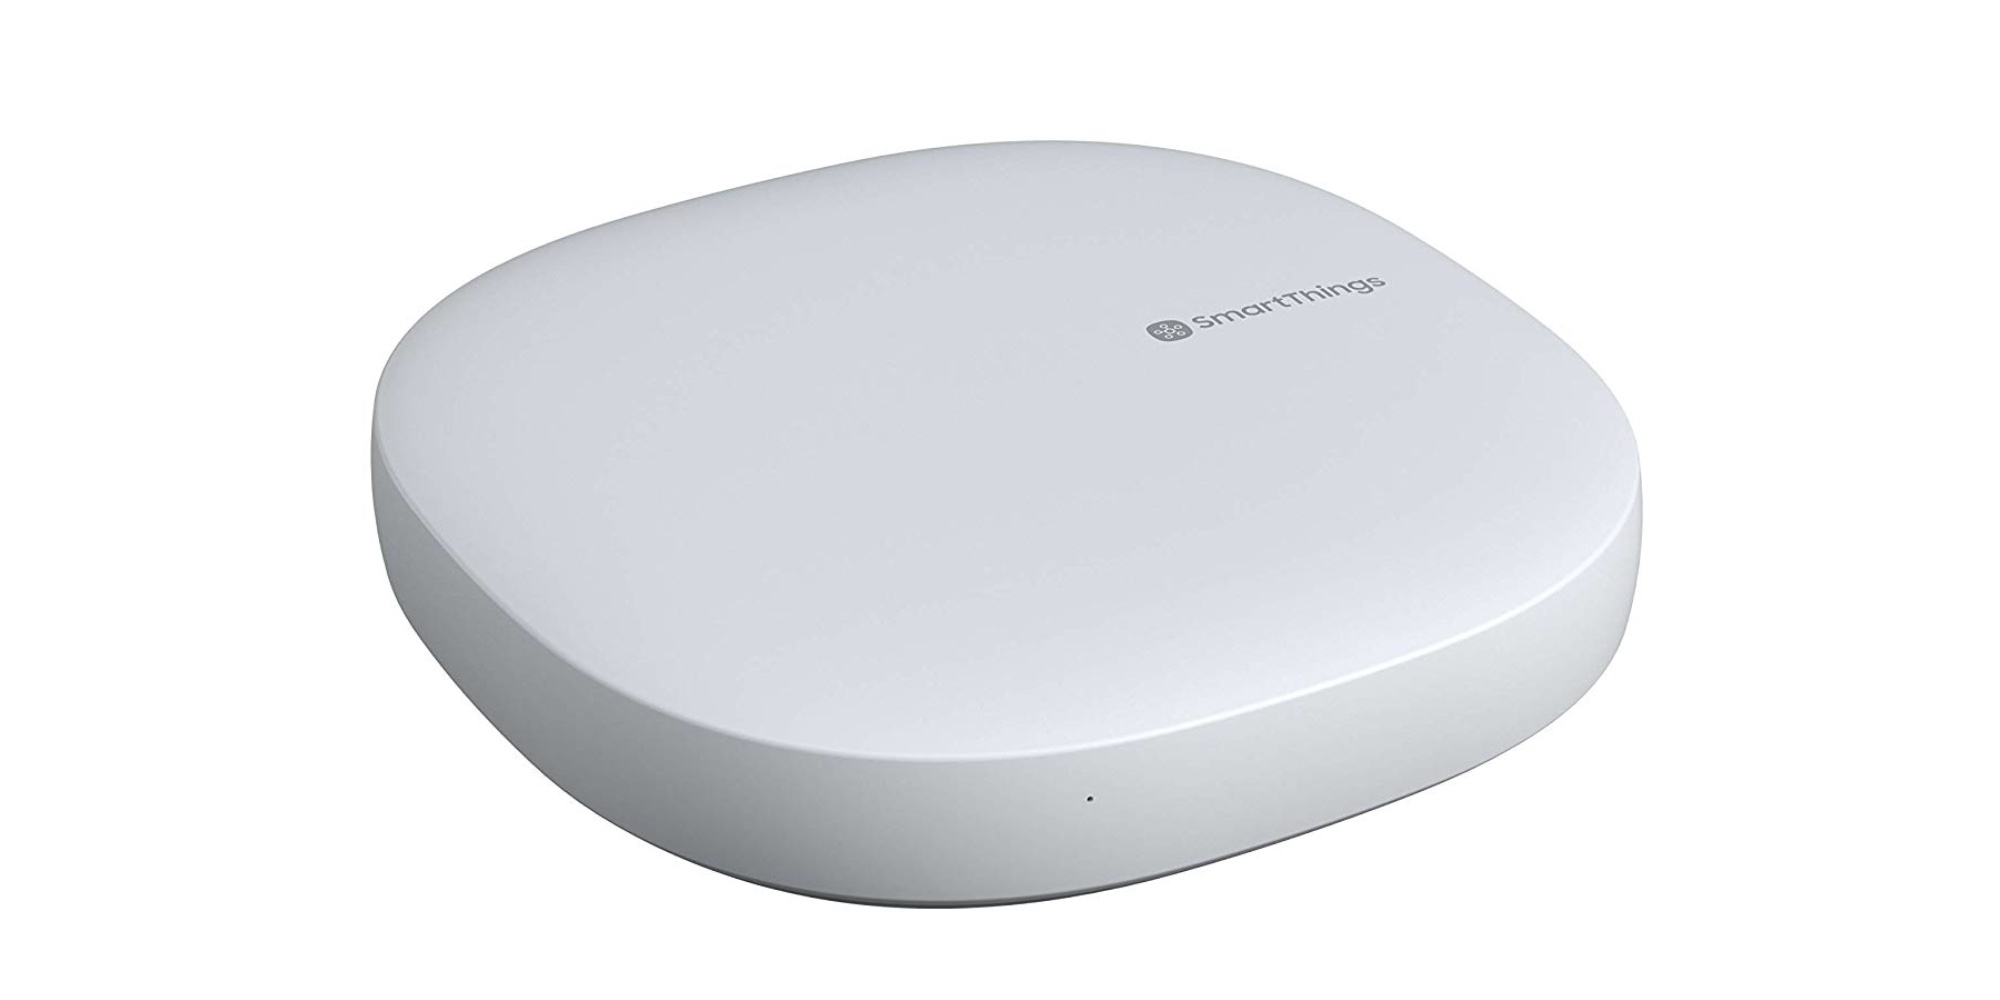 Samsung's SmartThings Hub elevates your setup at 60, its best price in